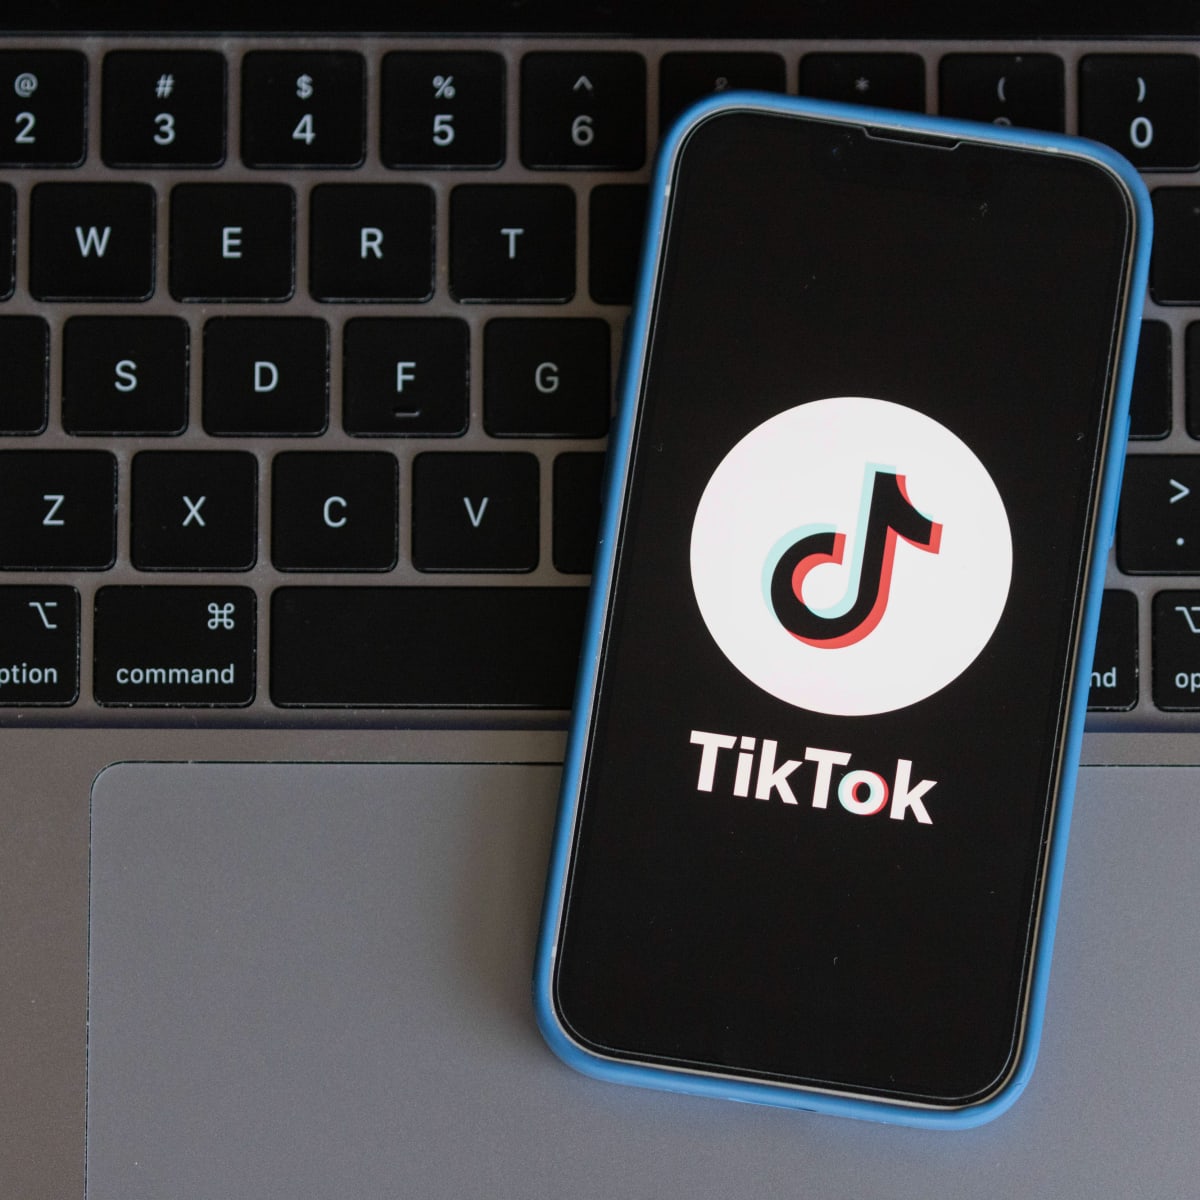 TikTok Makes History As The First Non-Game App To Reach $10B In Consumer Spending